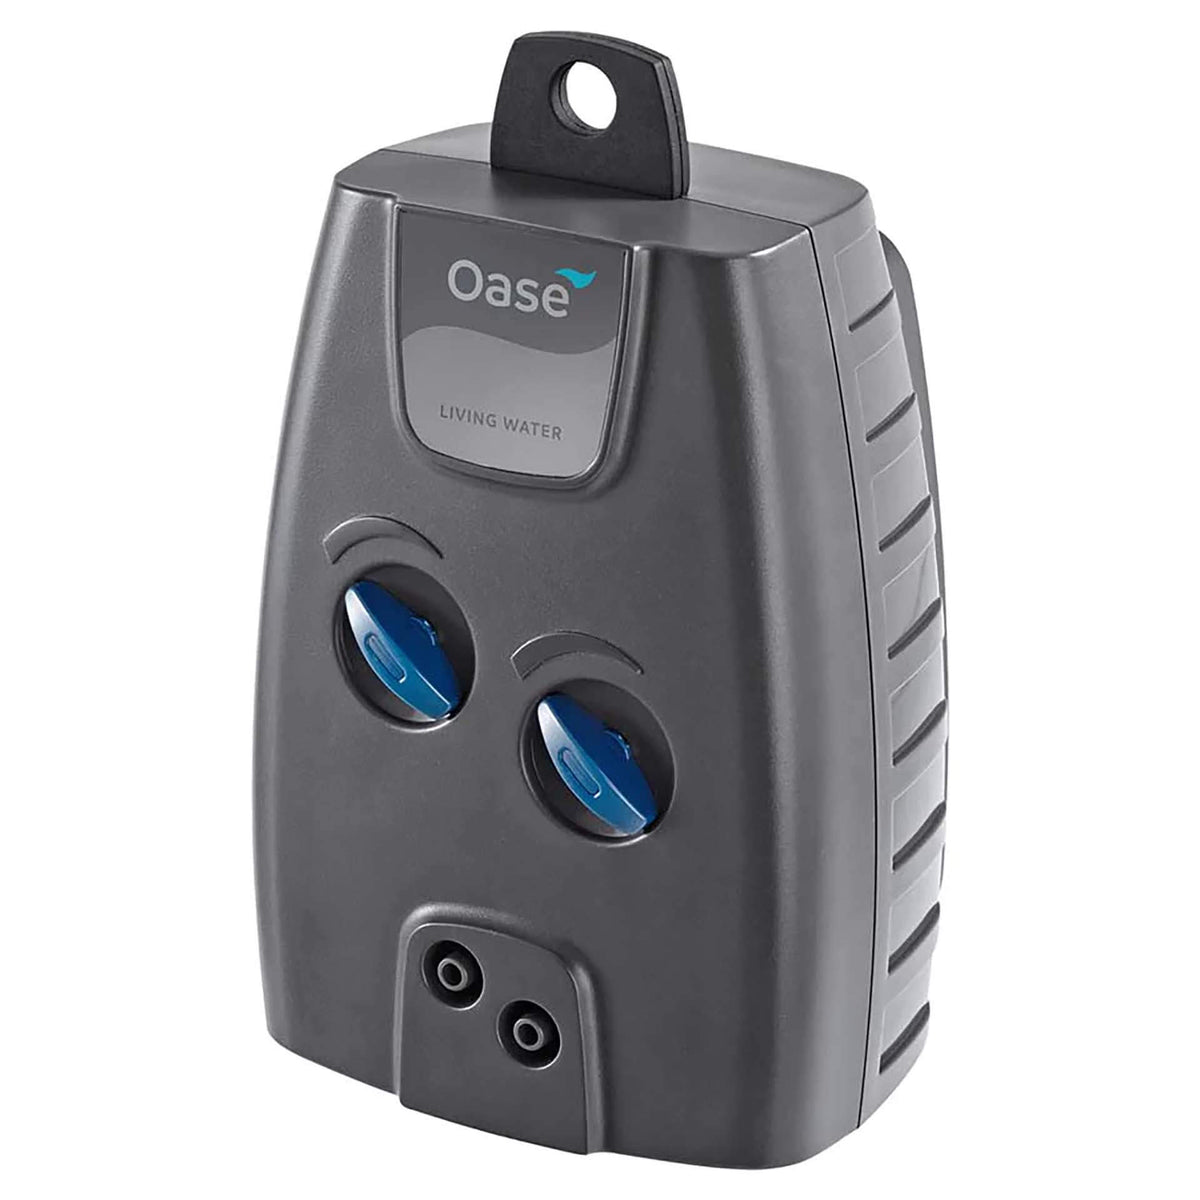 Oase Oxymax 200 Air Pump - Dual Outlet